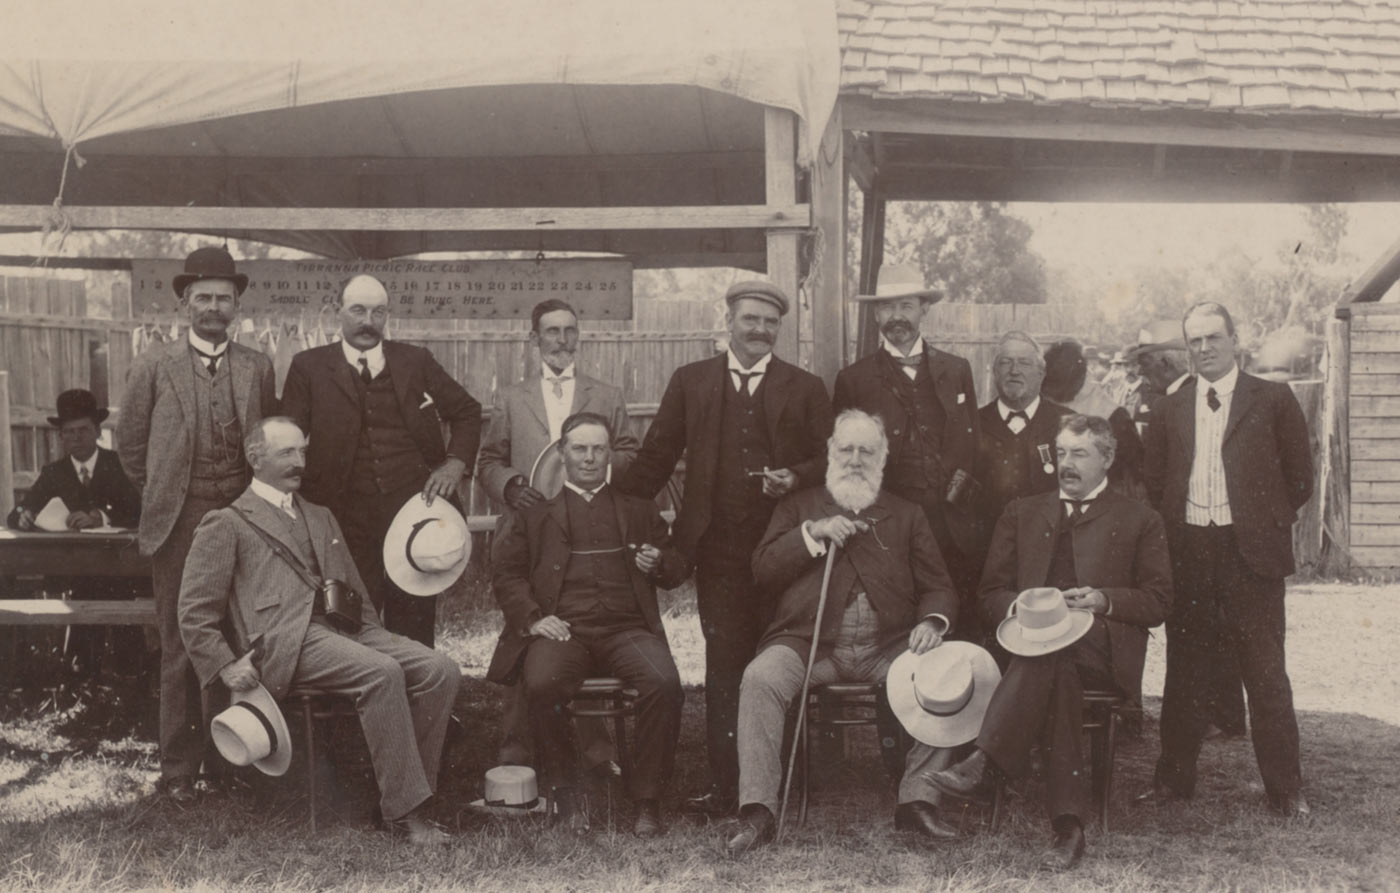 A black and white photograph that depicts four men seated in front row with Augustus Lucian Faithfull on the far right. Behind them seven men are standing with George Faithfull the first on the left. In the background a fence and open-sided building; on the left in background, one man seated at a table below a banner which reads 'Tirranna Picnic Race Club'. - click to view larger image